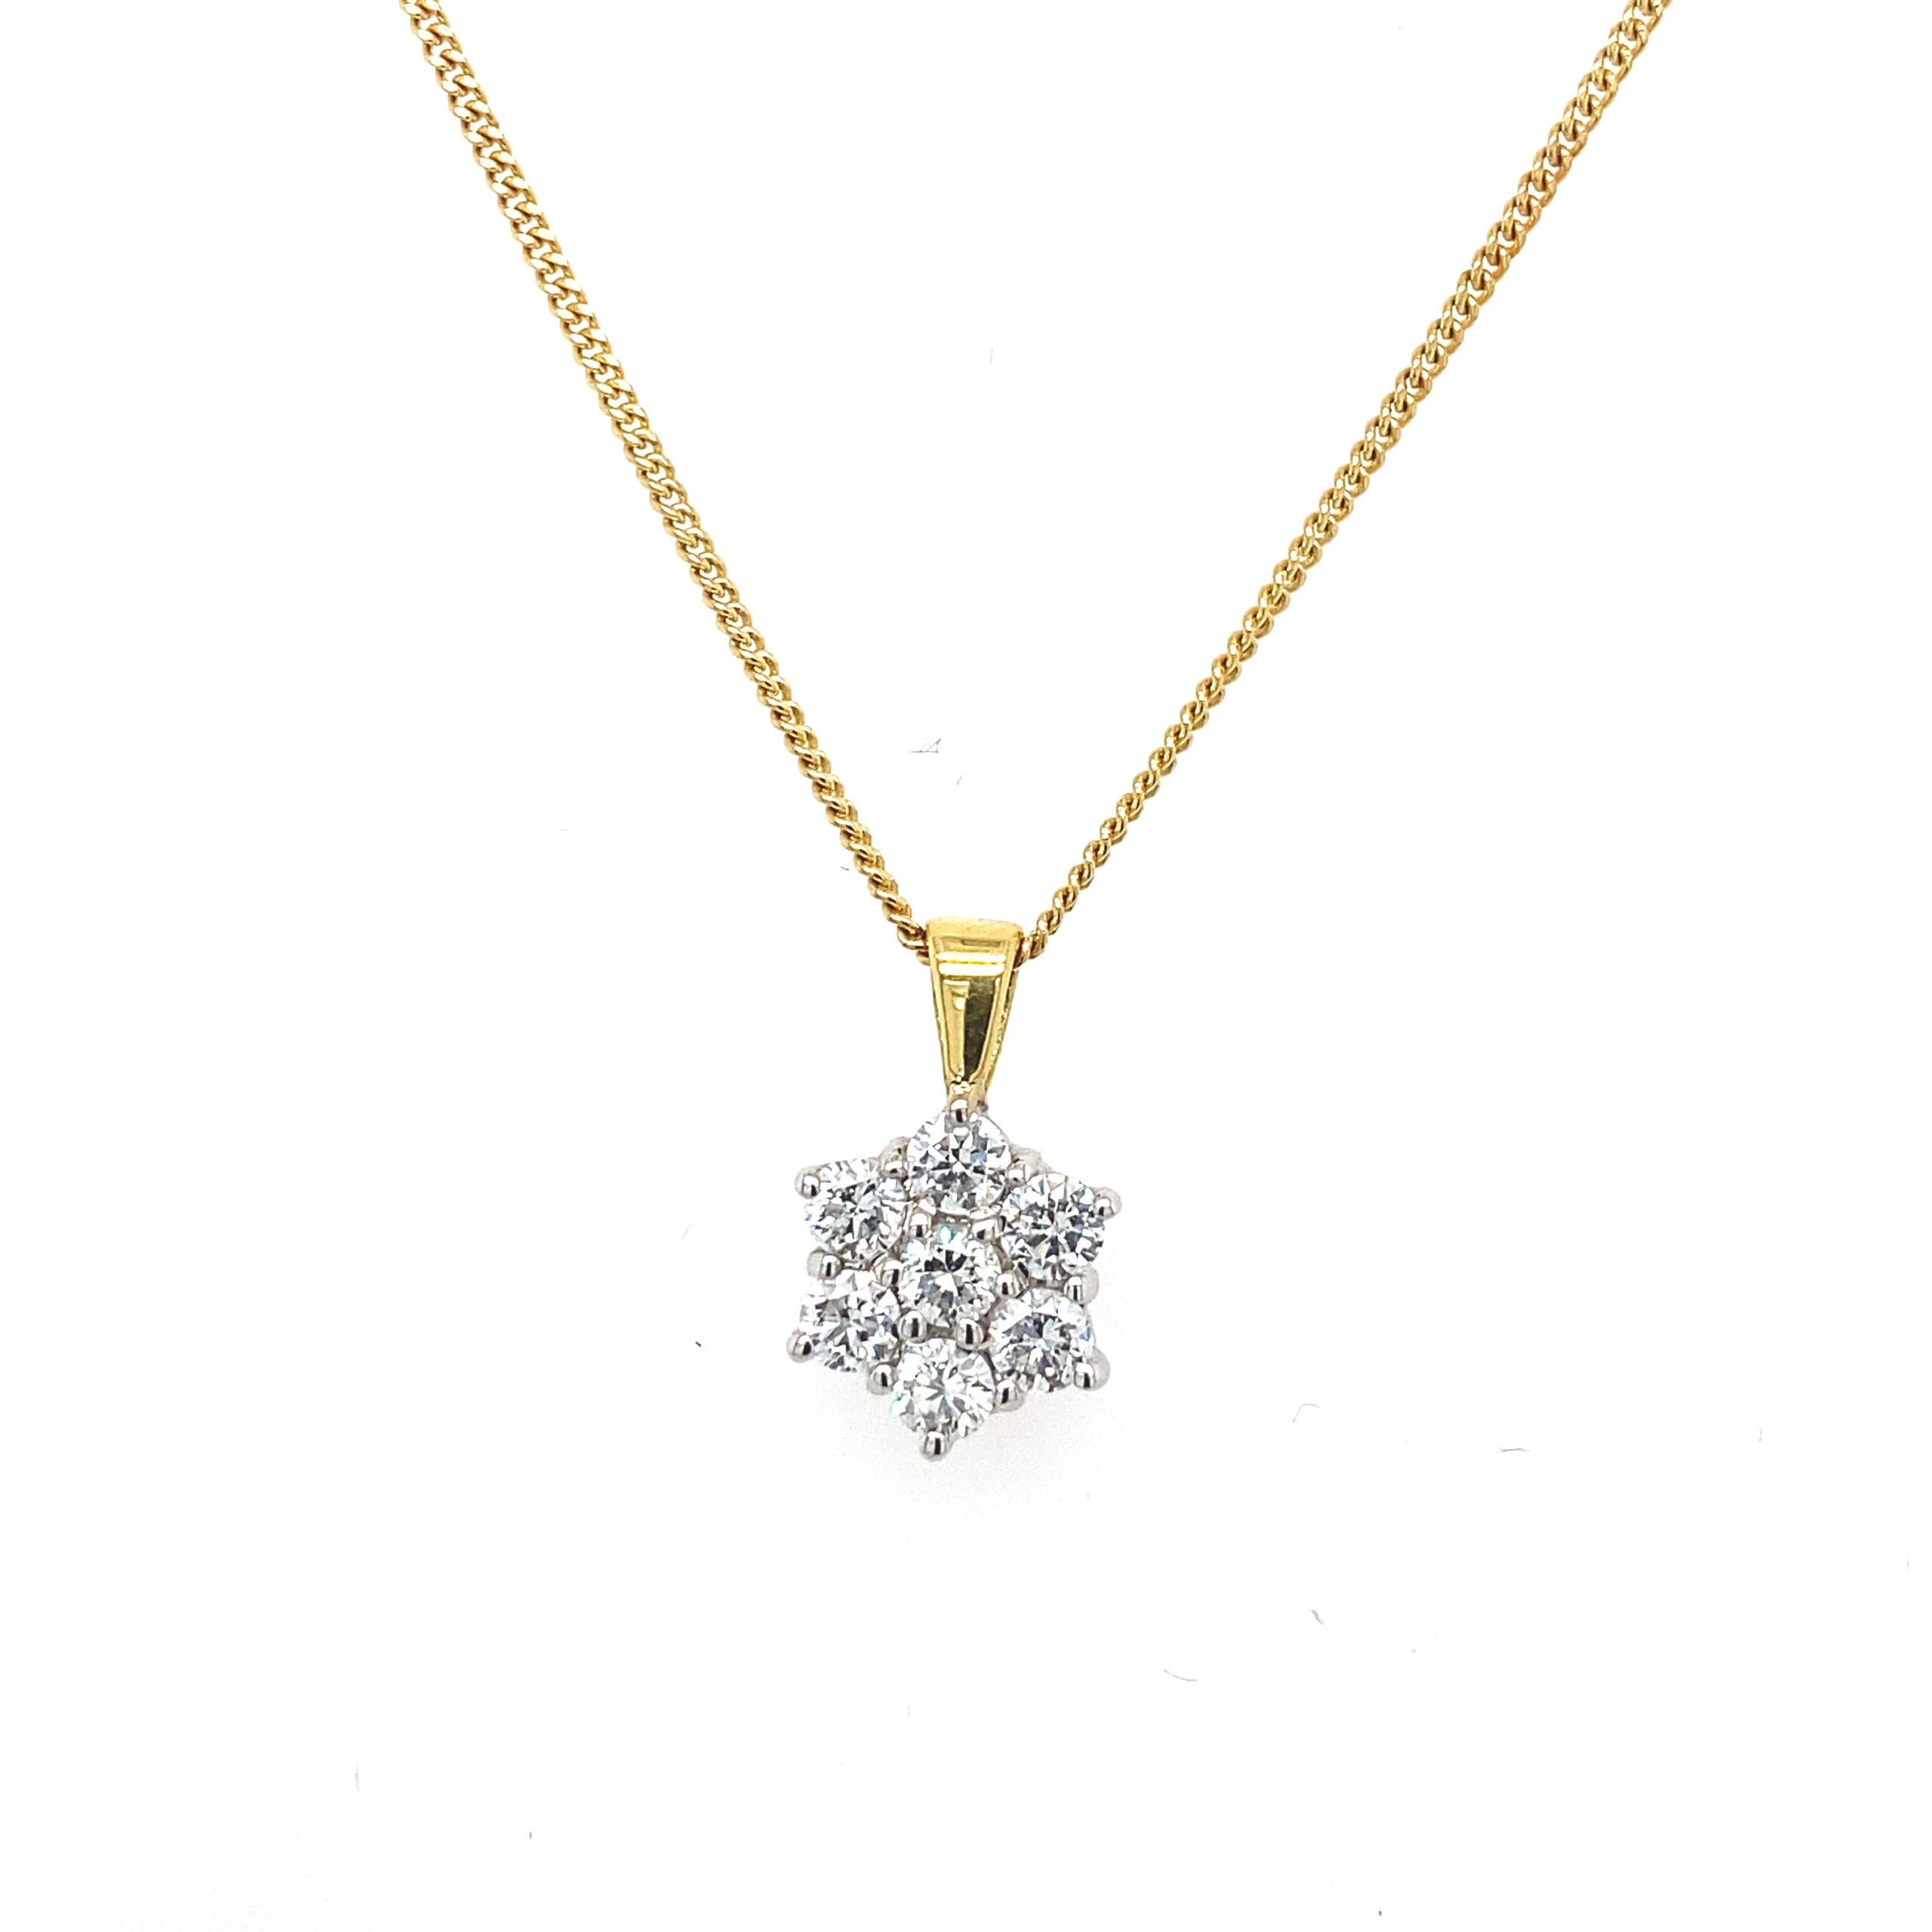 18ct Yellow Gold Diamond Cluster Pendant Set With 7 Diamonds Total Weight 0.35ct

Additional Information:
Total Diamond Weight: 0.35ct 
Diamond Colour: G/H
Diamond Clarity: Si
Total Weight: 3.2g
Pendant Diameter: 8.3mm
Chain Length: 16''
SMS2698